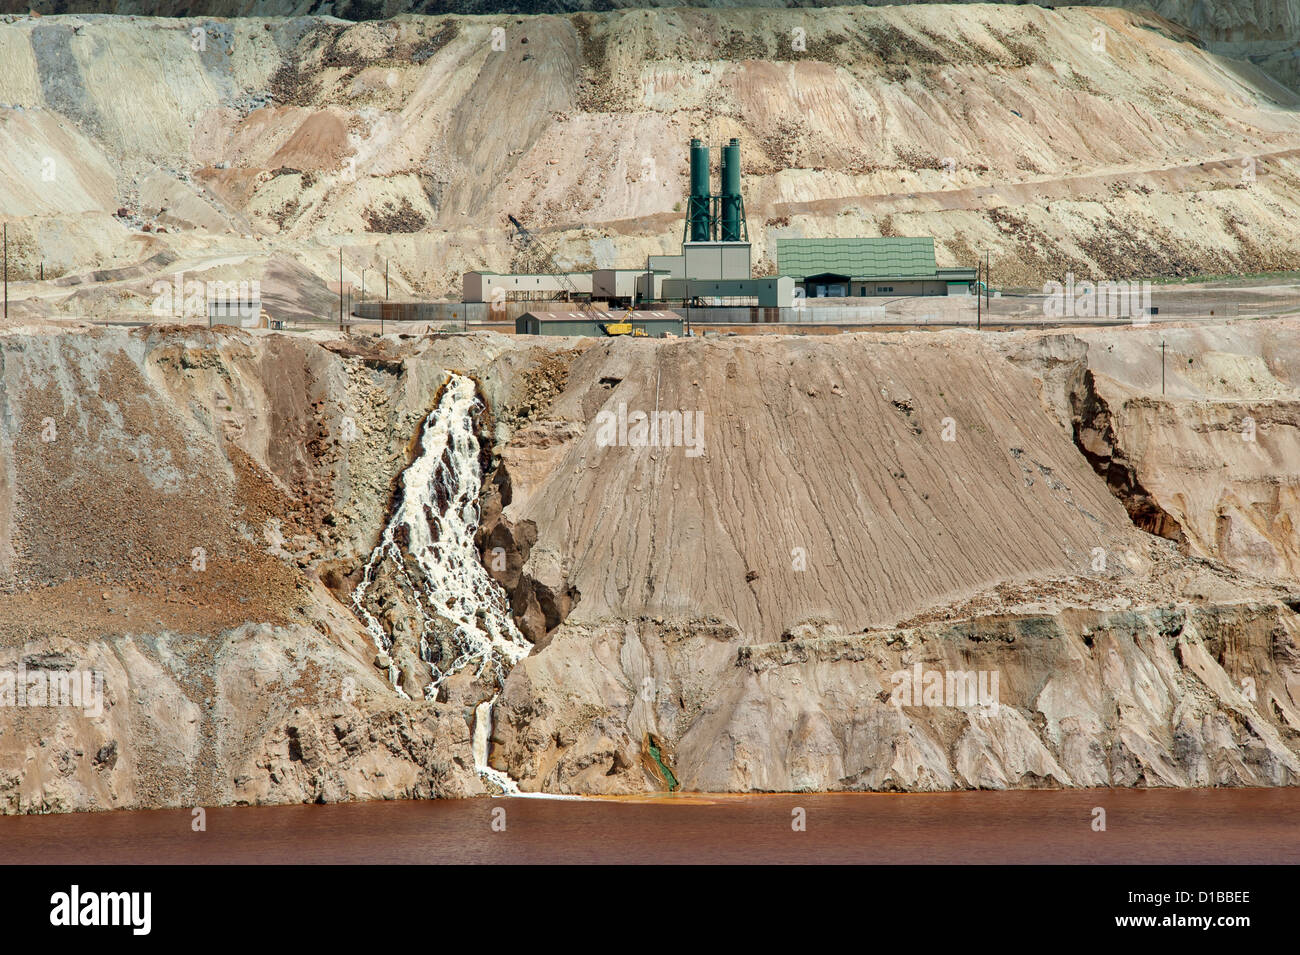 Water treatment plant along the edge of the Berkeley Pit in Butte, Montana.  The pit was an open pit copper mine. Stock Photo